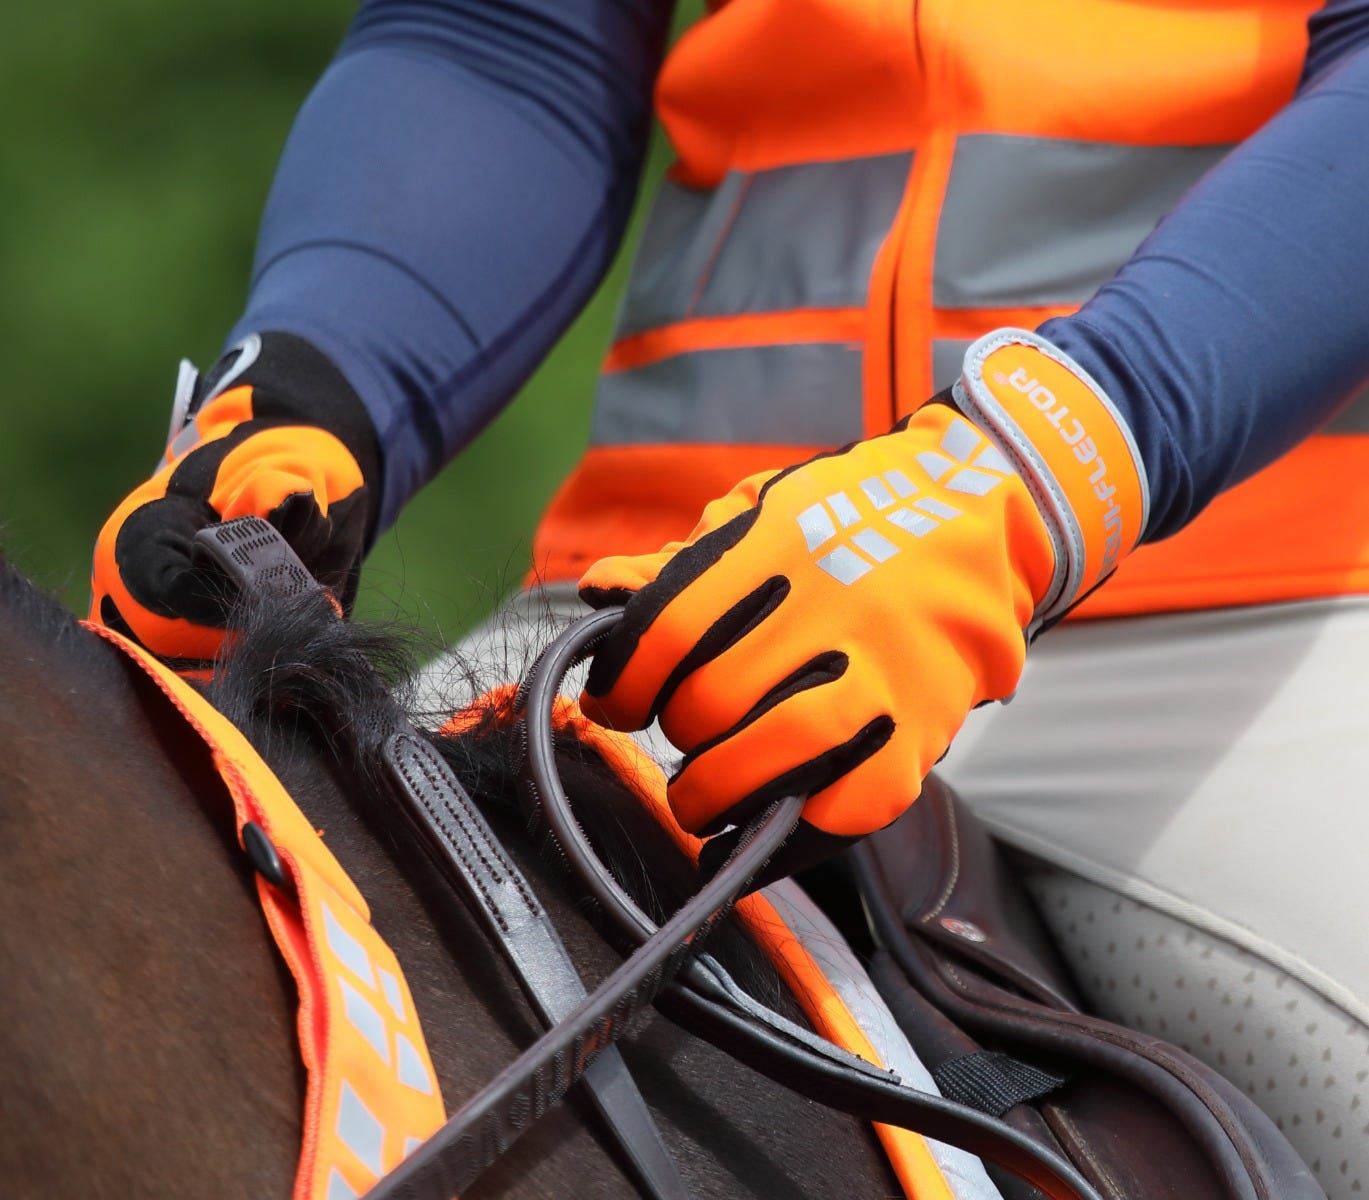 Shires EQUI-FLECTOR Horse Riding Gloves - Just Horse Riders